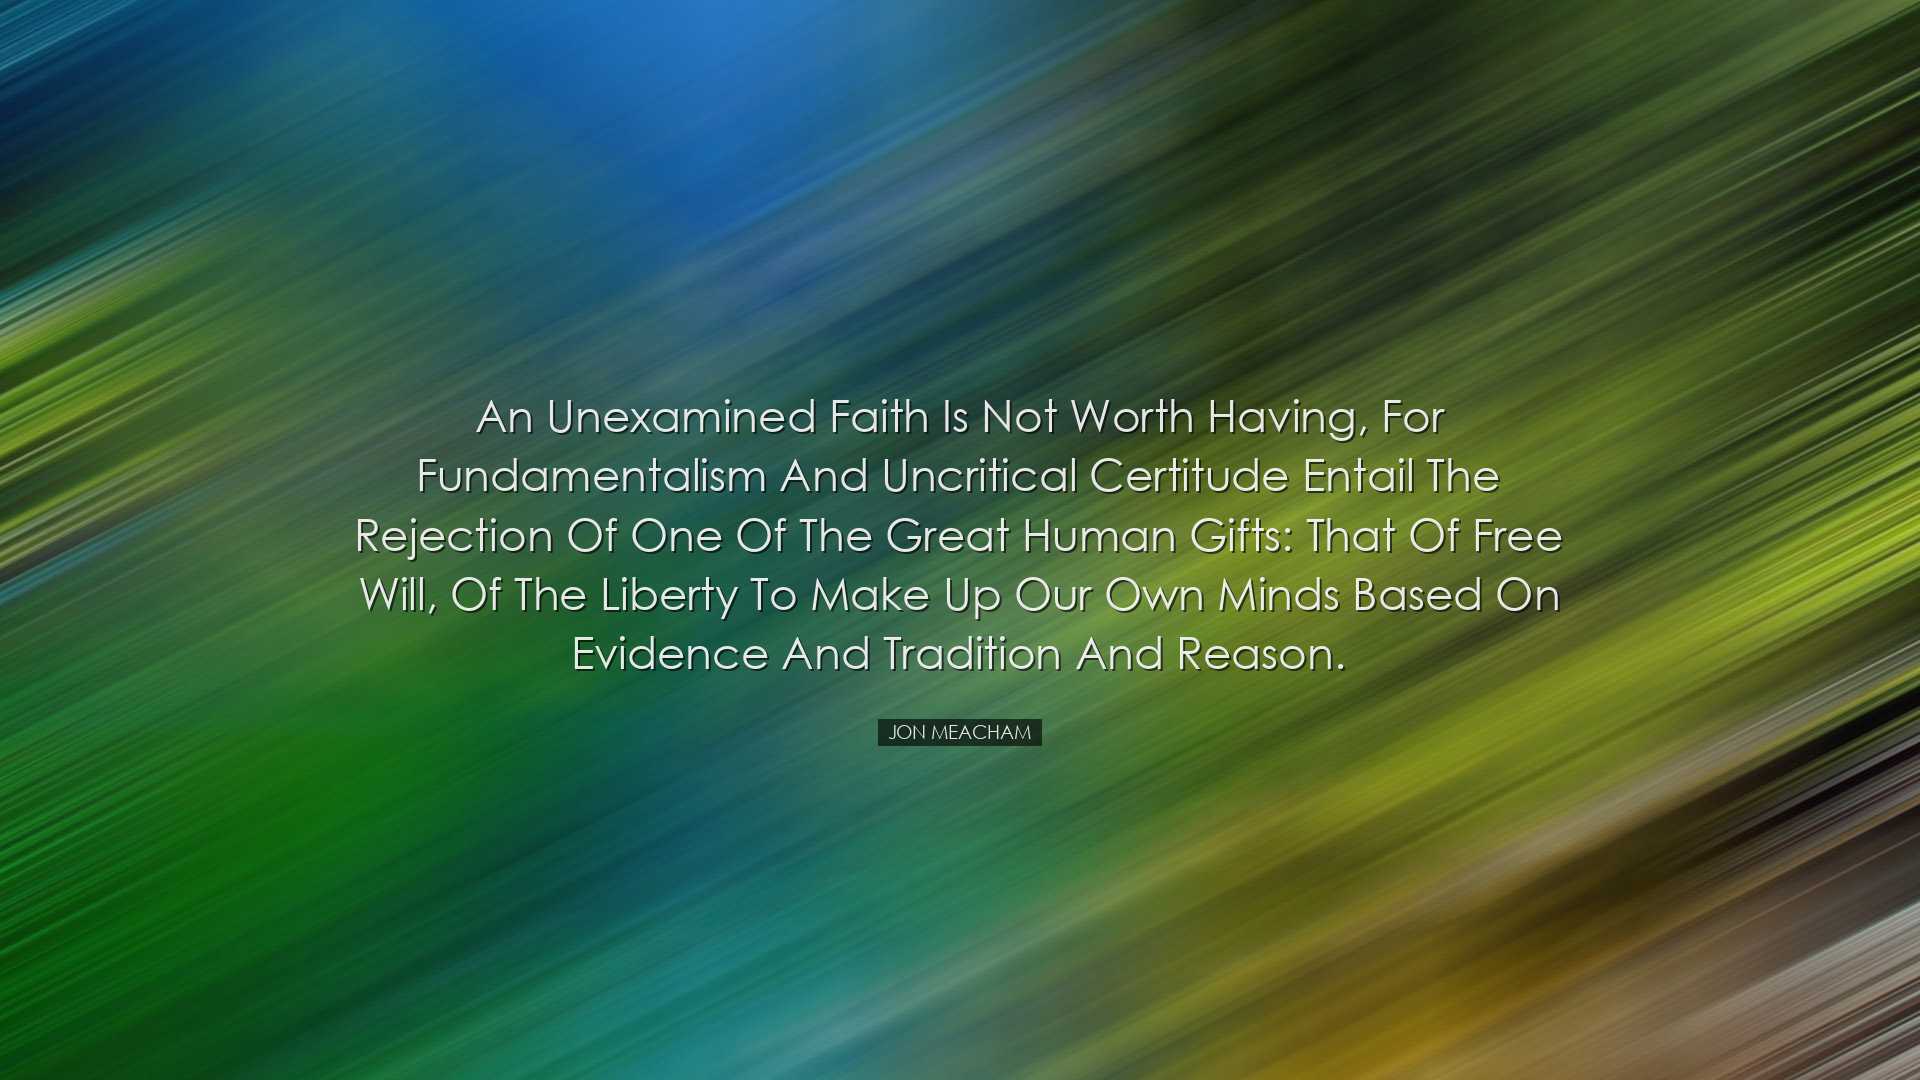 An unexamined faith is not worth having, for fundamentalism and un